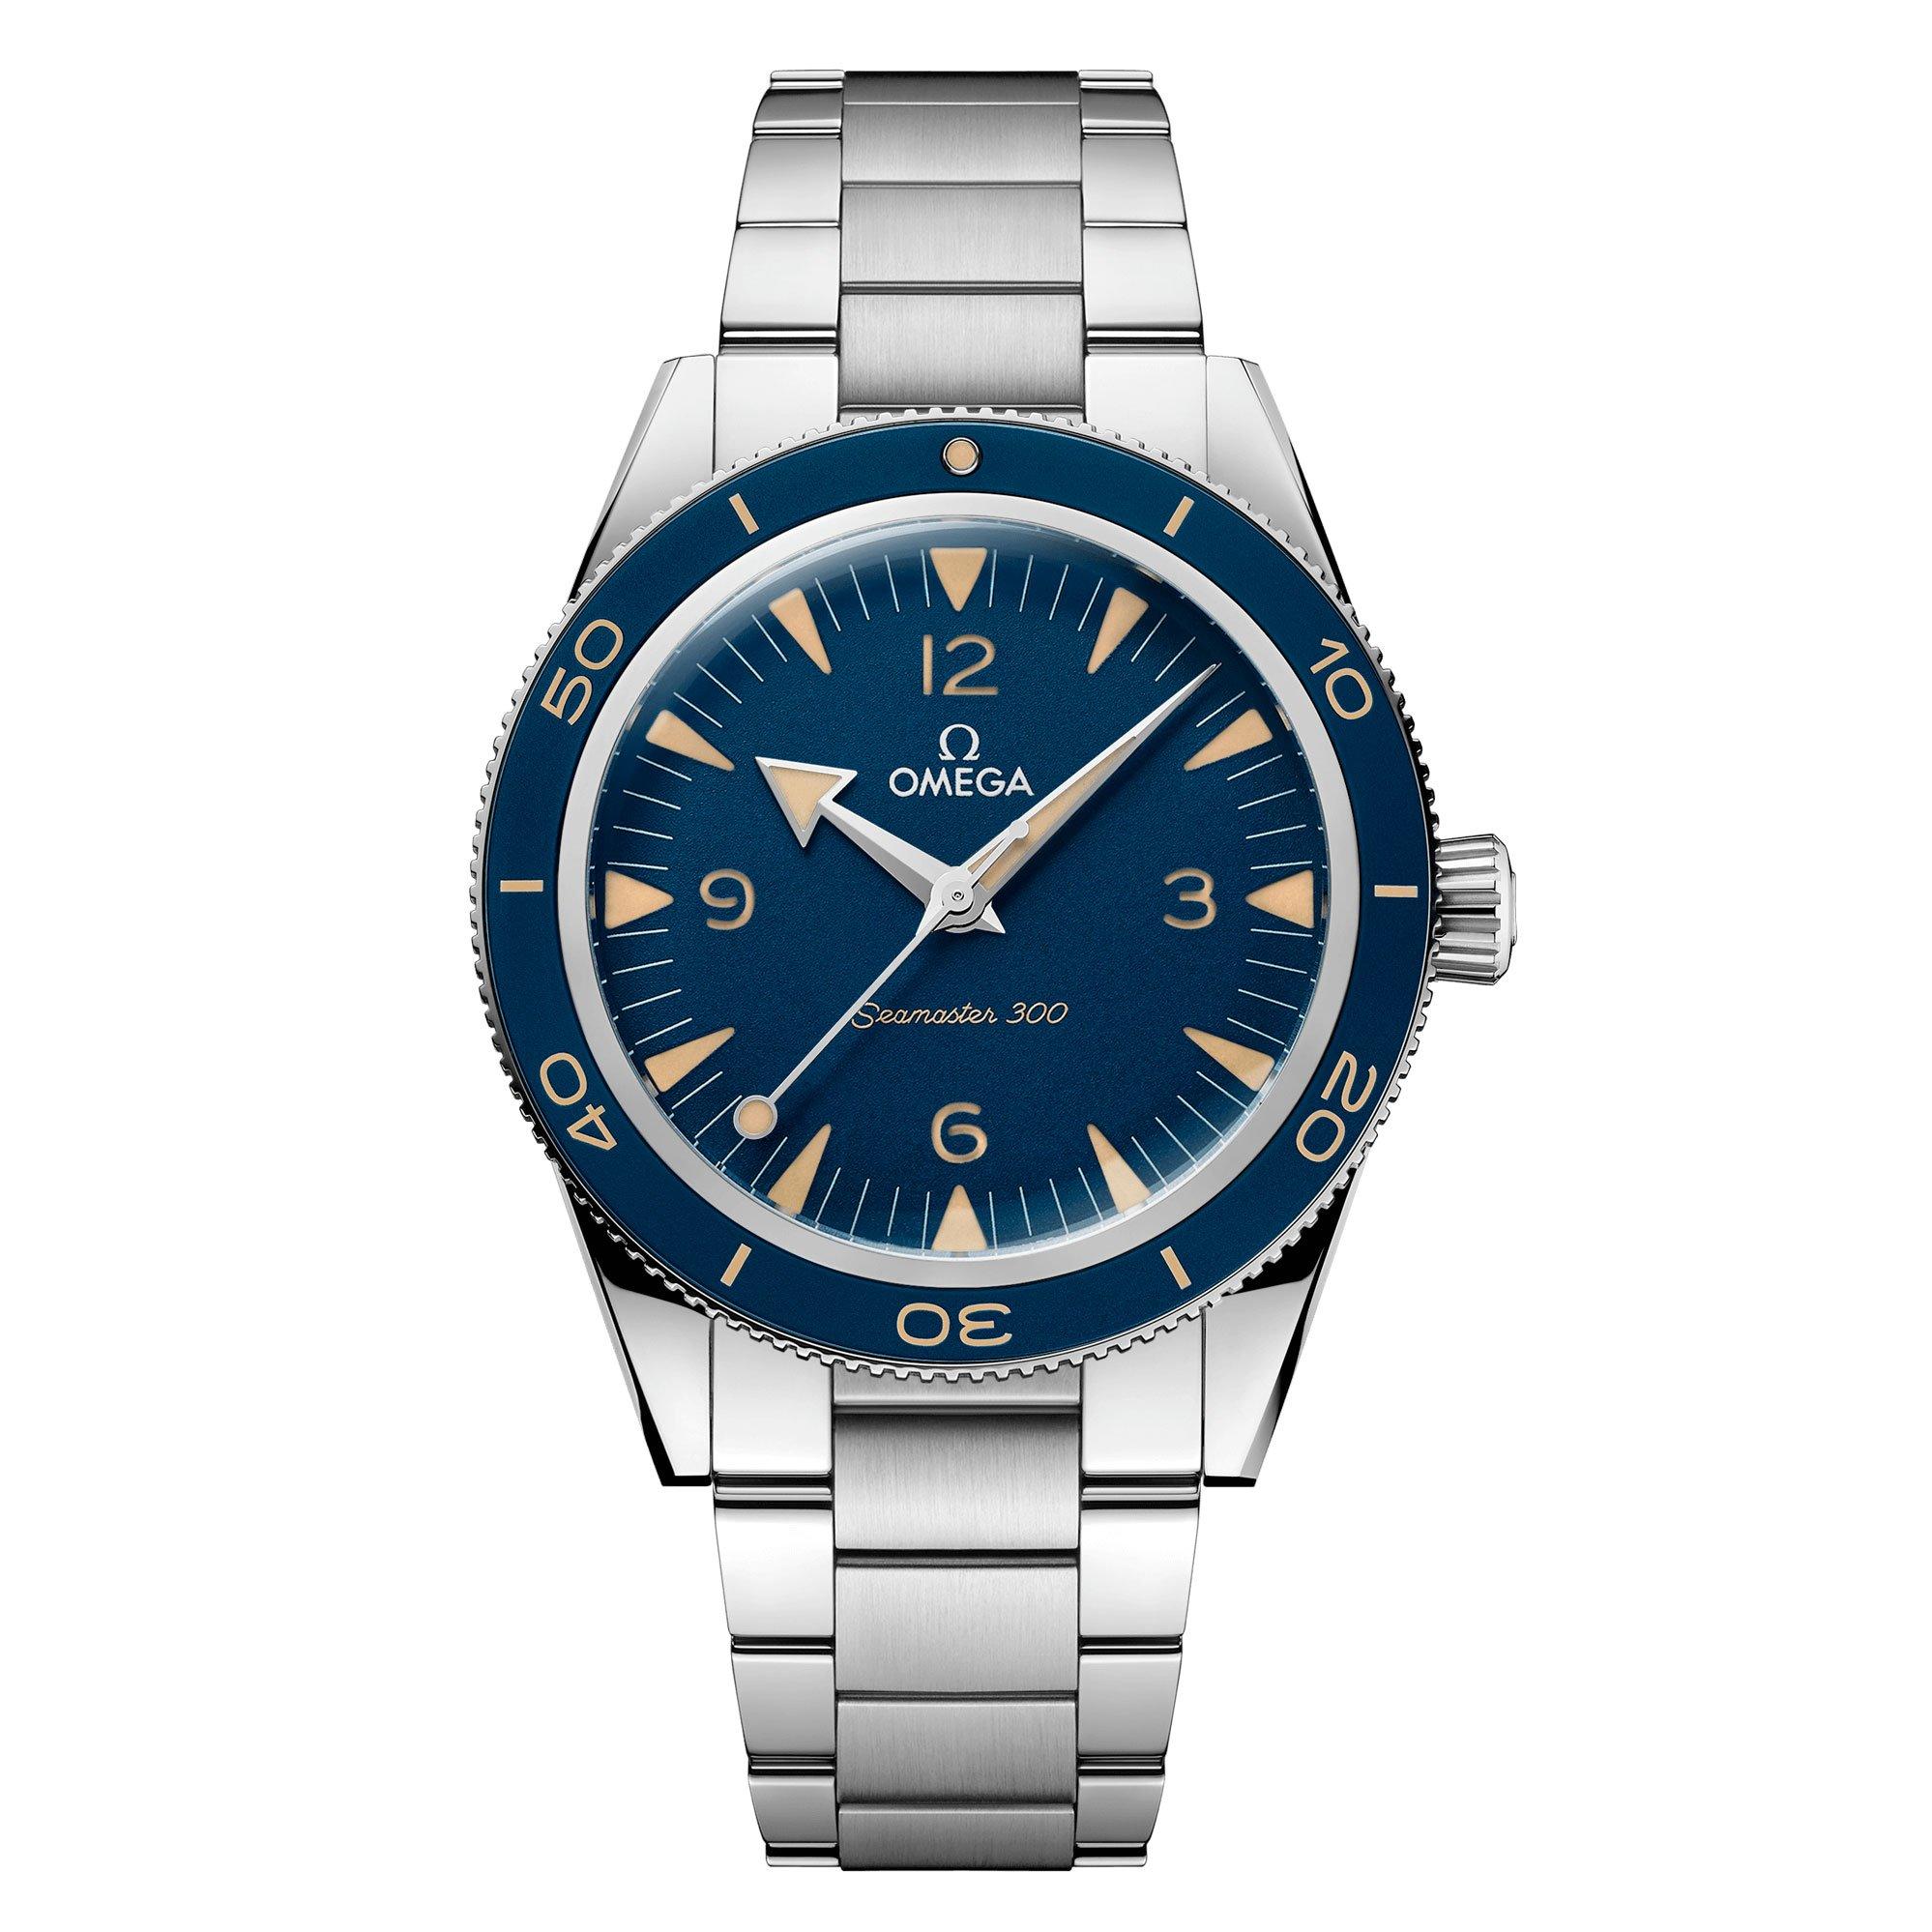 omega seamaster 300m co-axial master chronometer men's watch 234.30.41.21.03.001, size 41mm